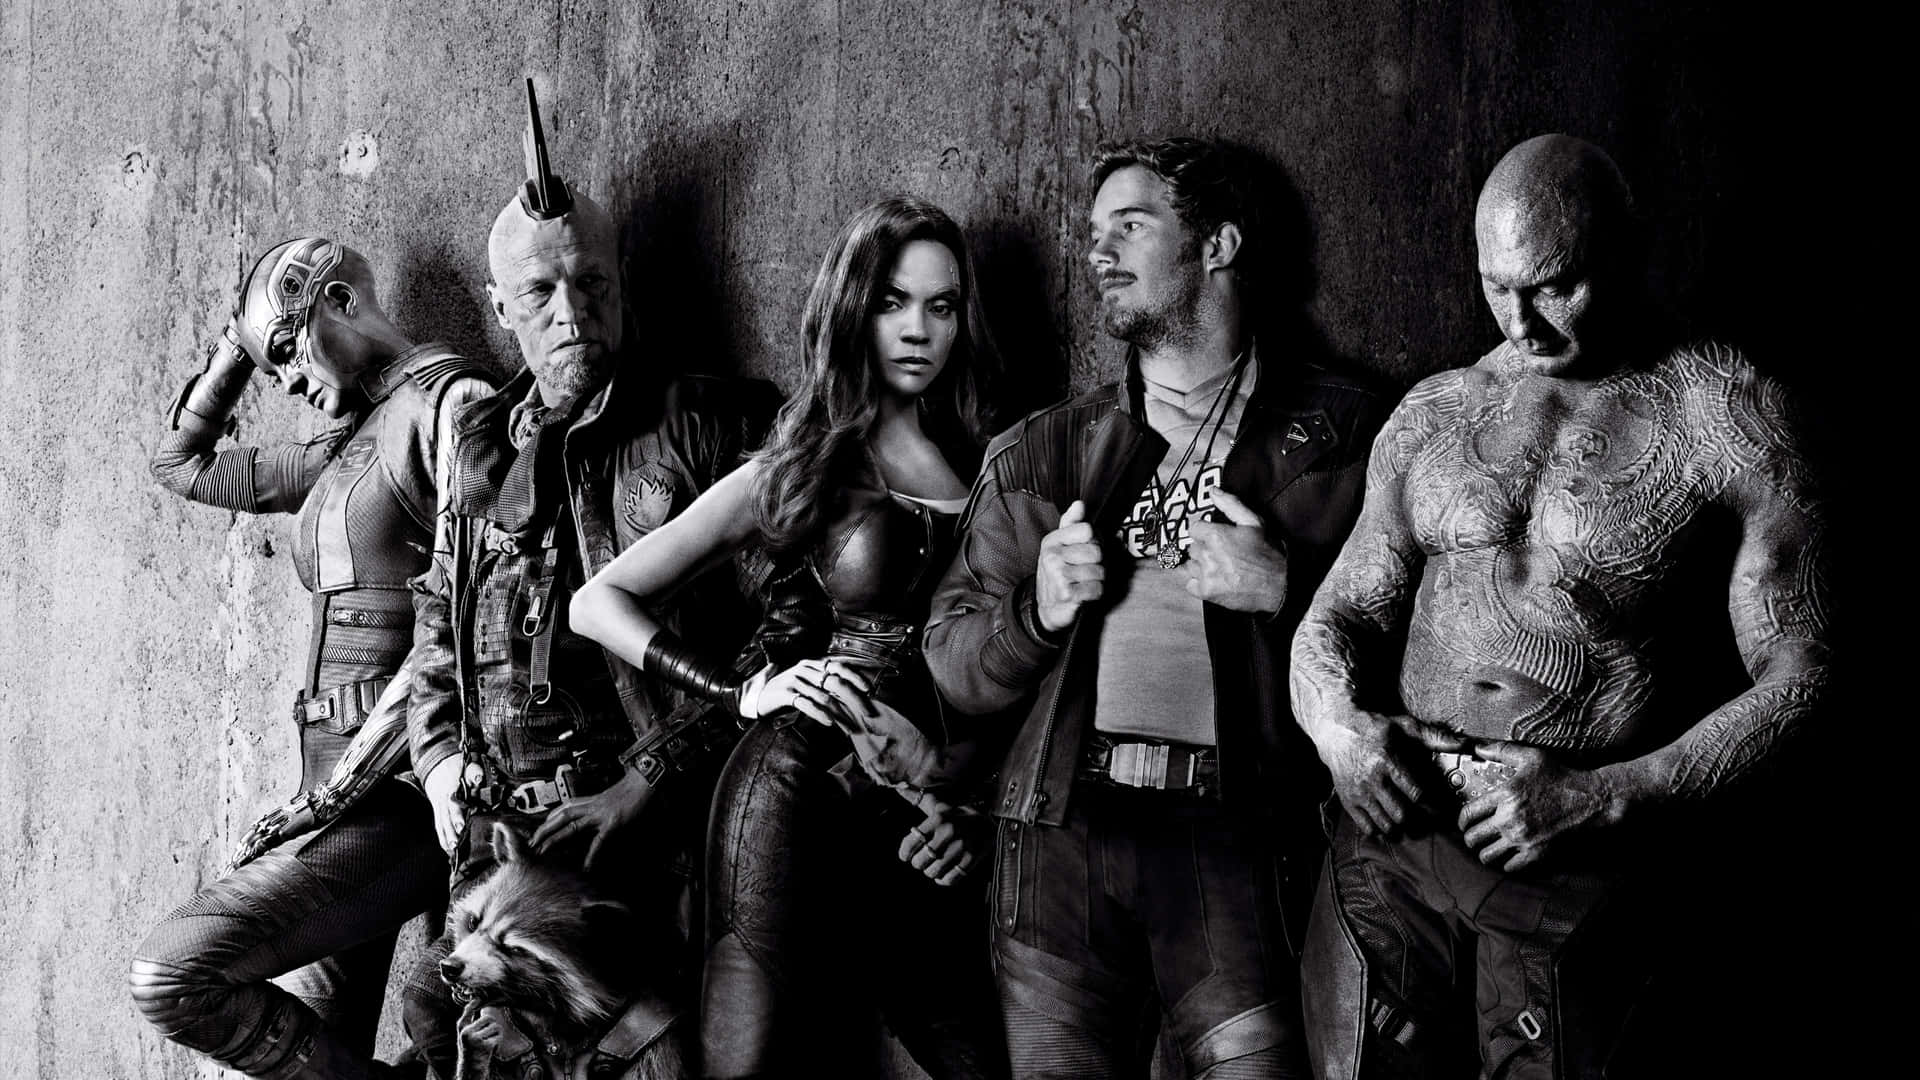 Entire 'Guardians of the Galaxy' crew posing for a picture in volume 2 Wallpaper